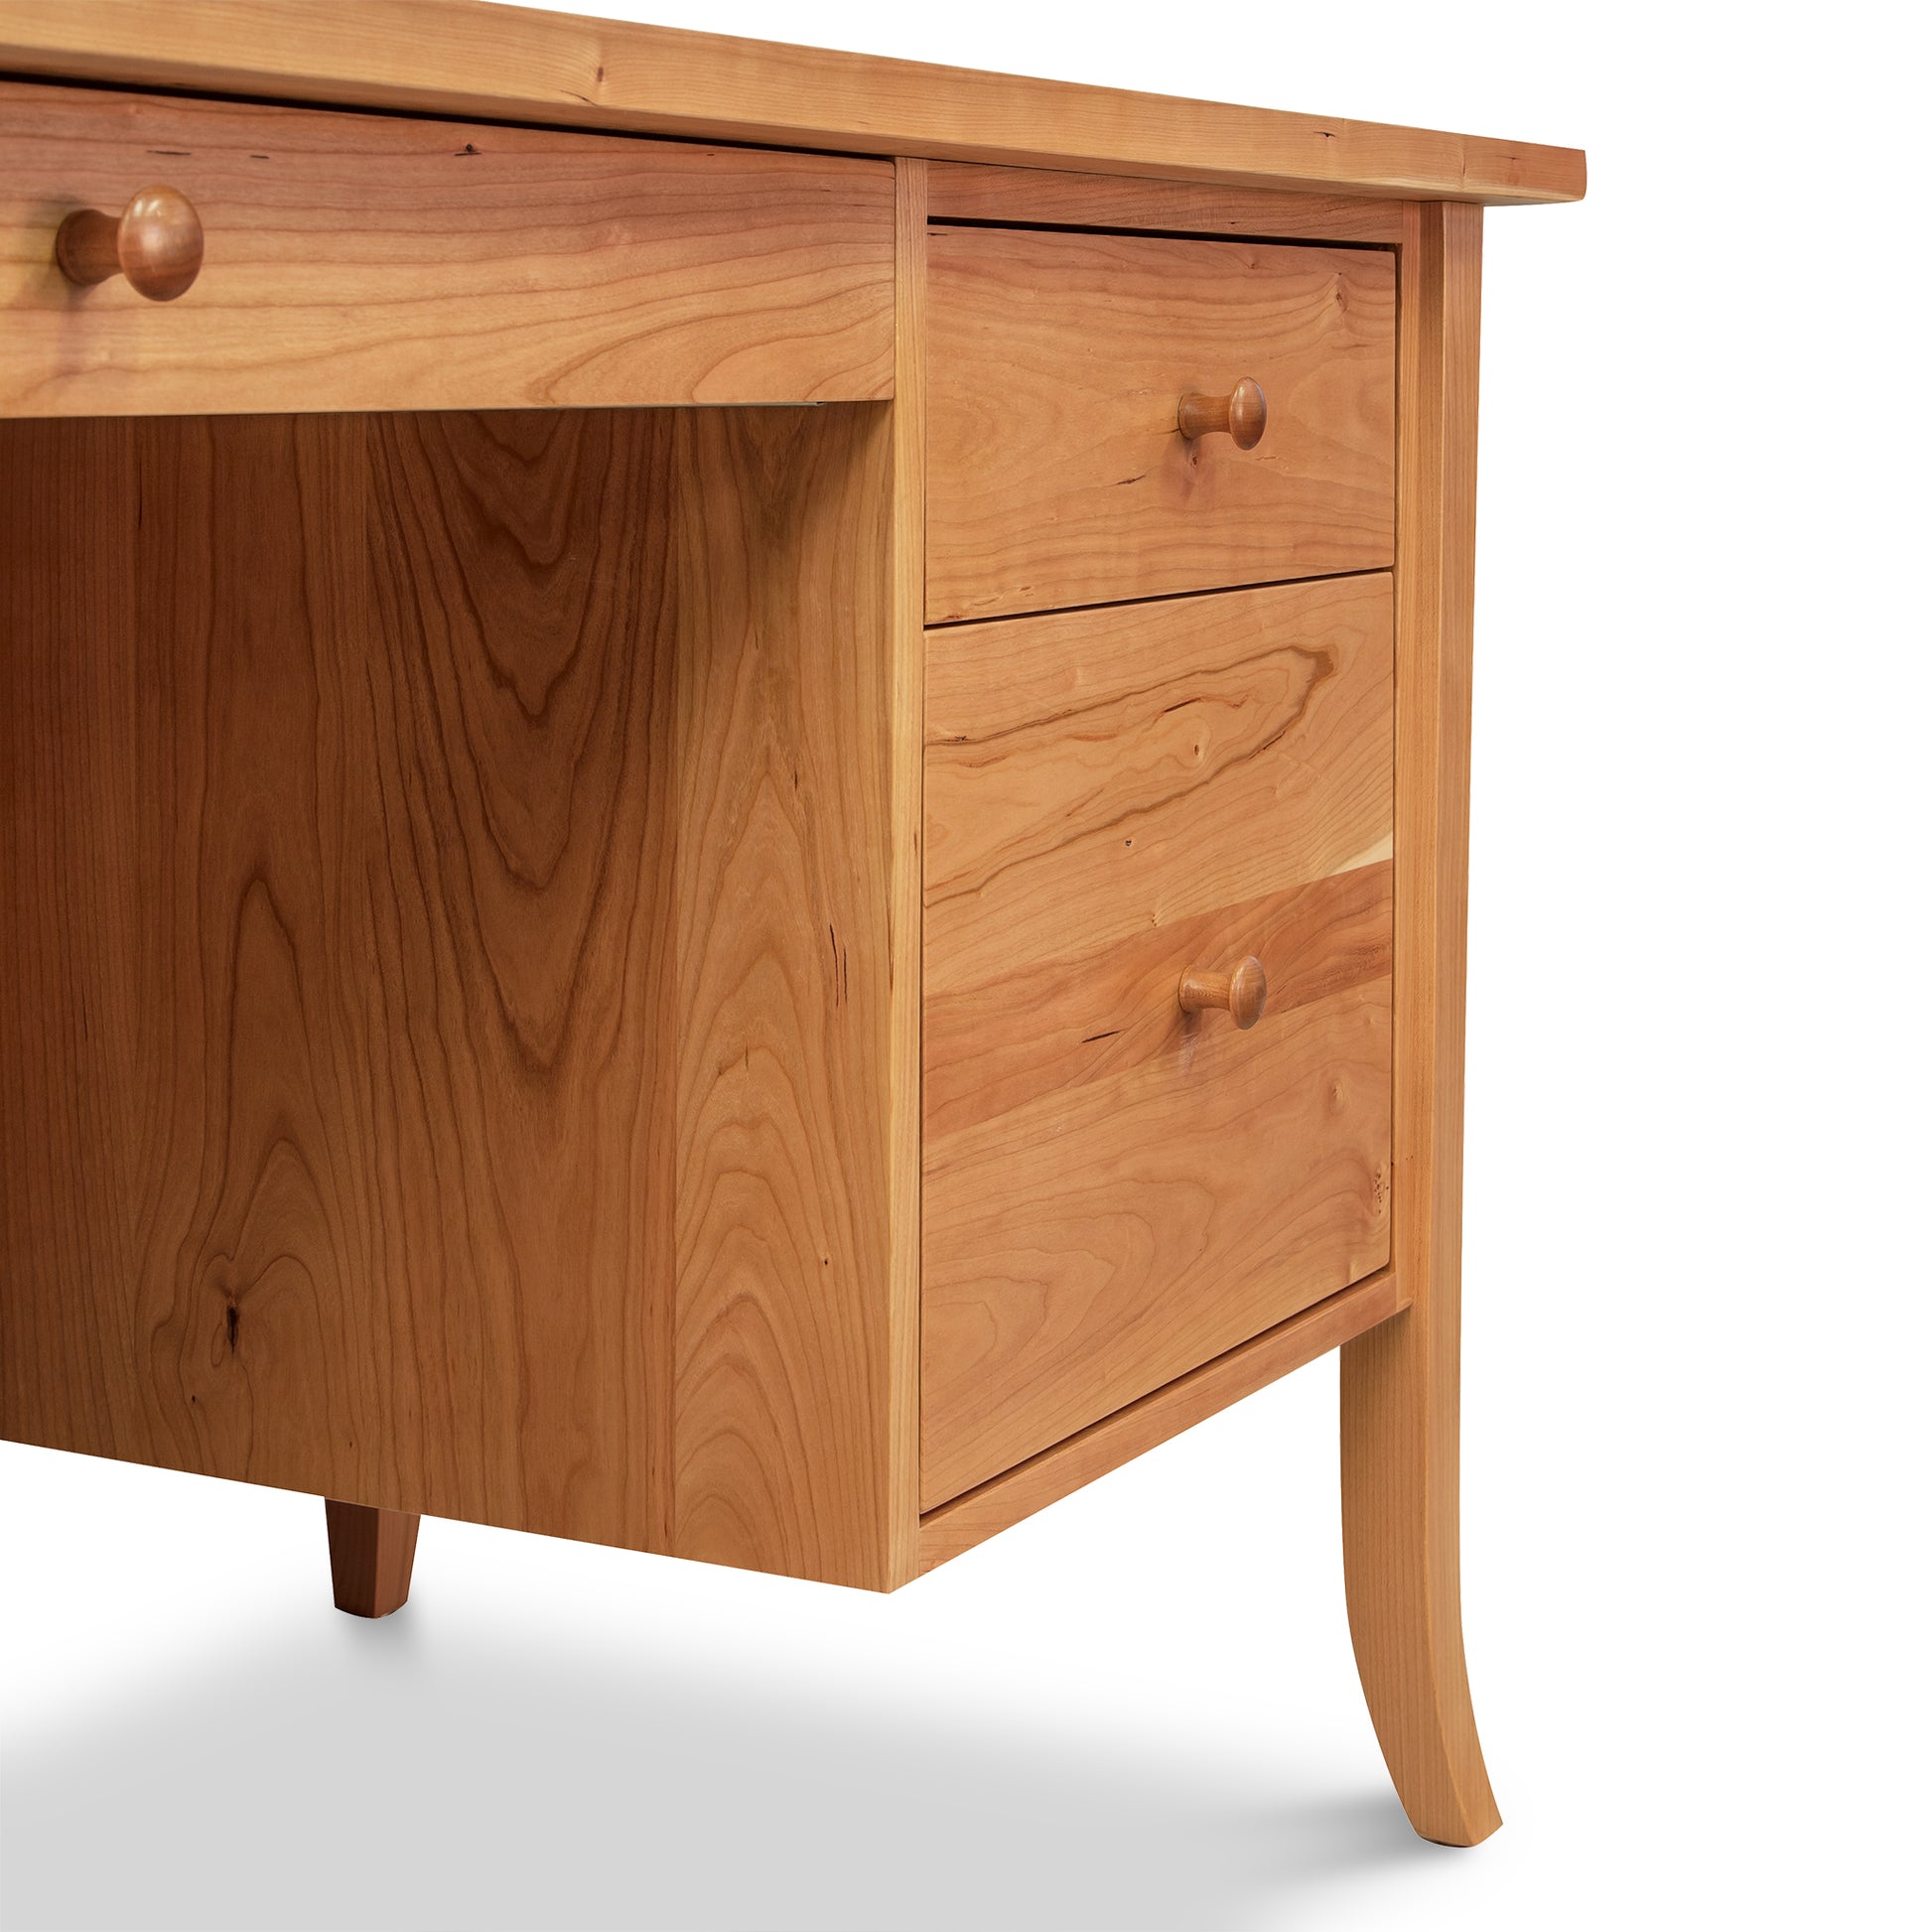 A Lyndon Furniture small wood flare leg executive desk with drawers.